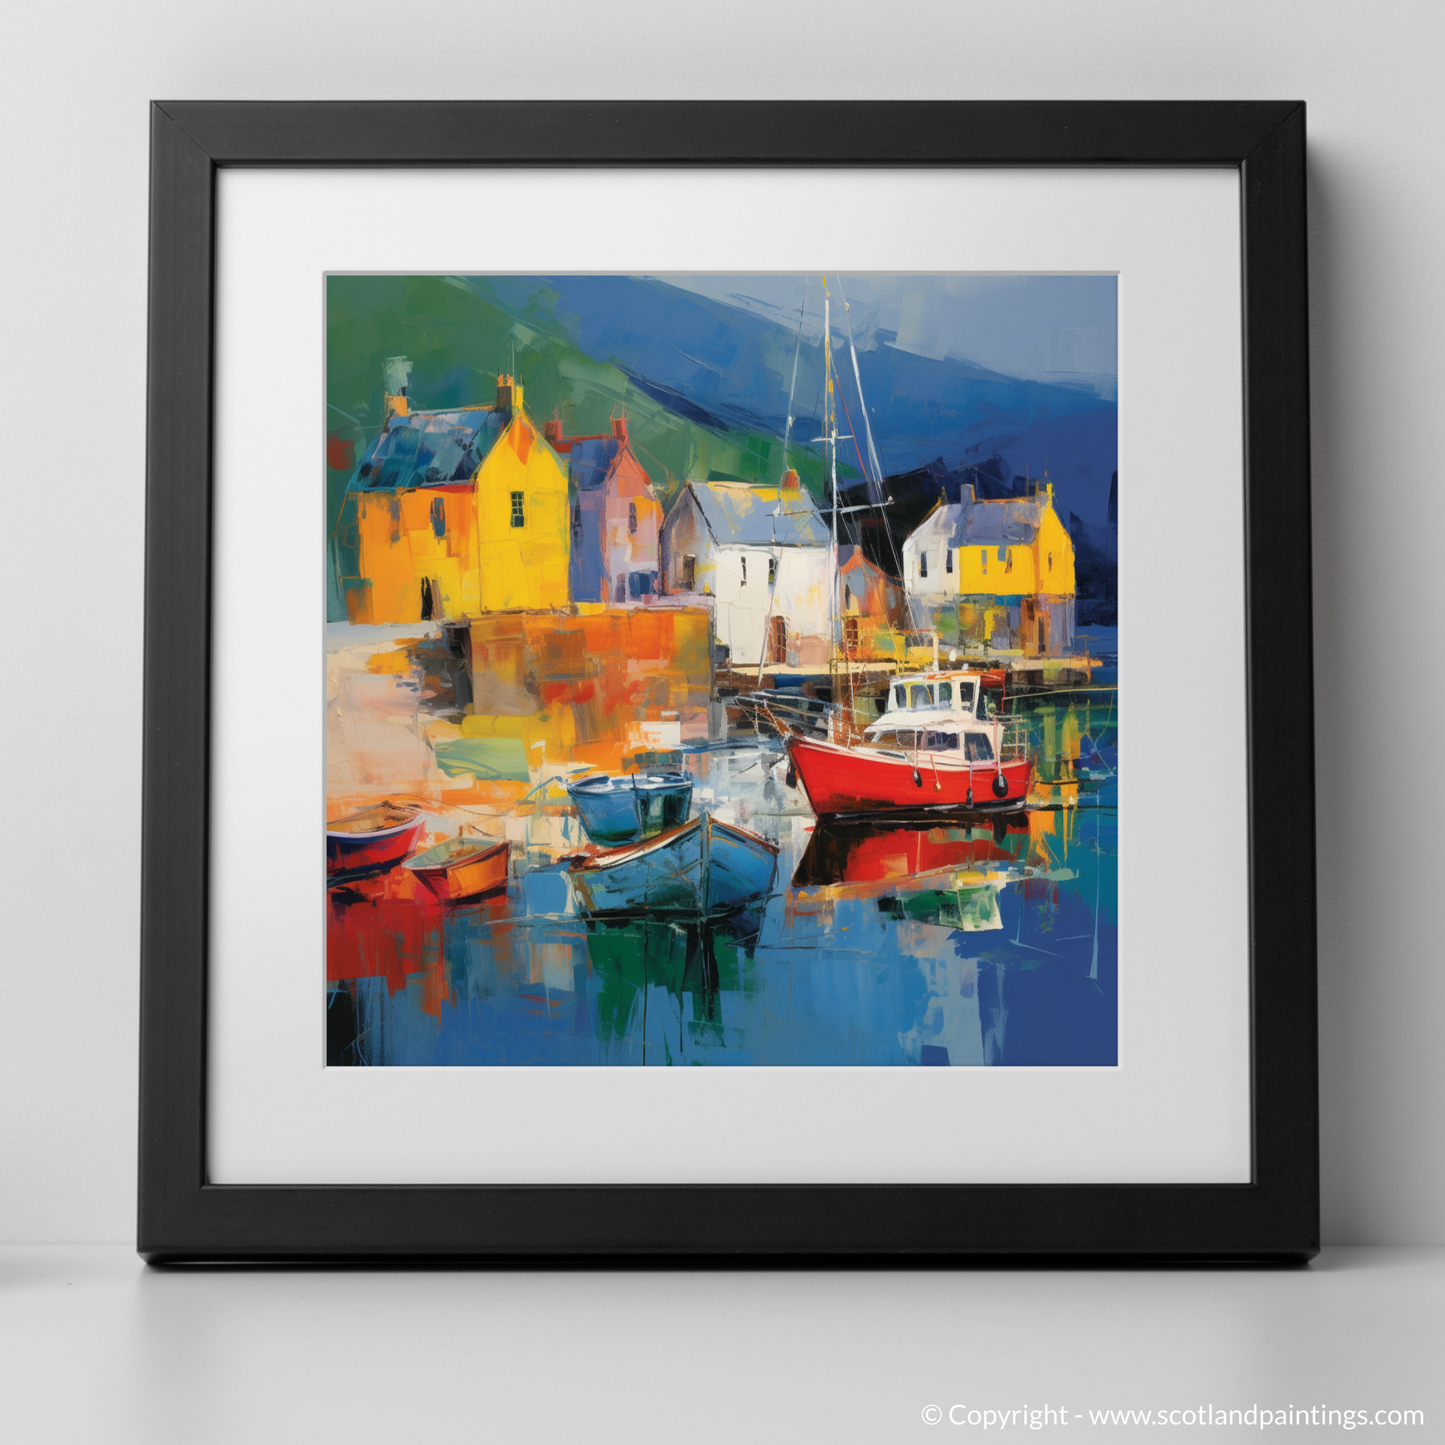 Tarbert Essence: An Abstract Expressionist Ode to Scottish Coastal Charm